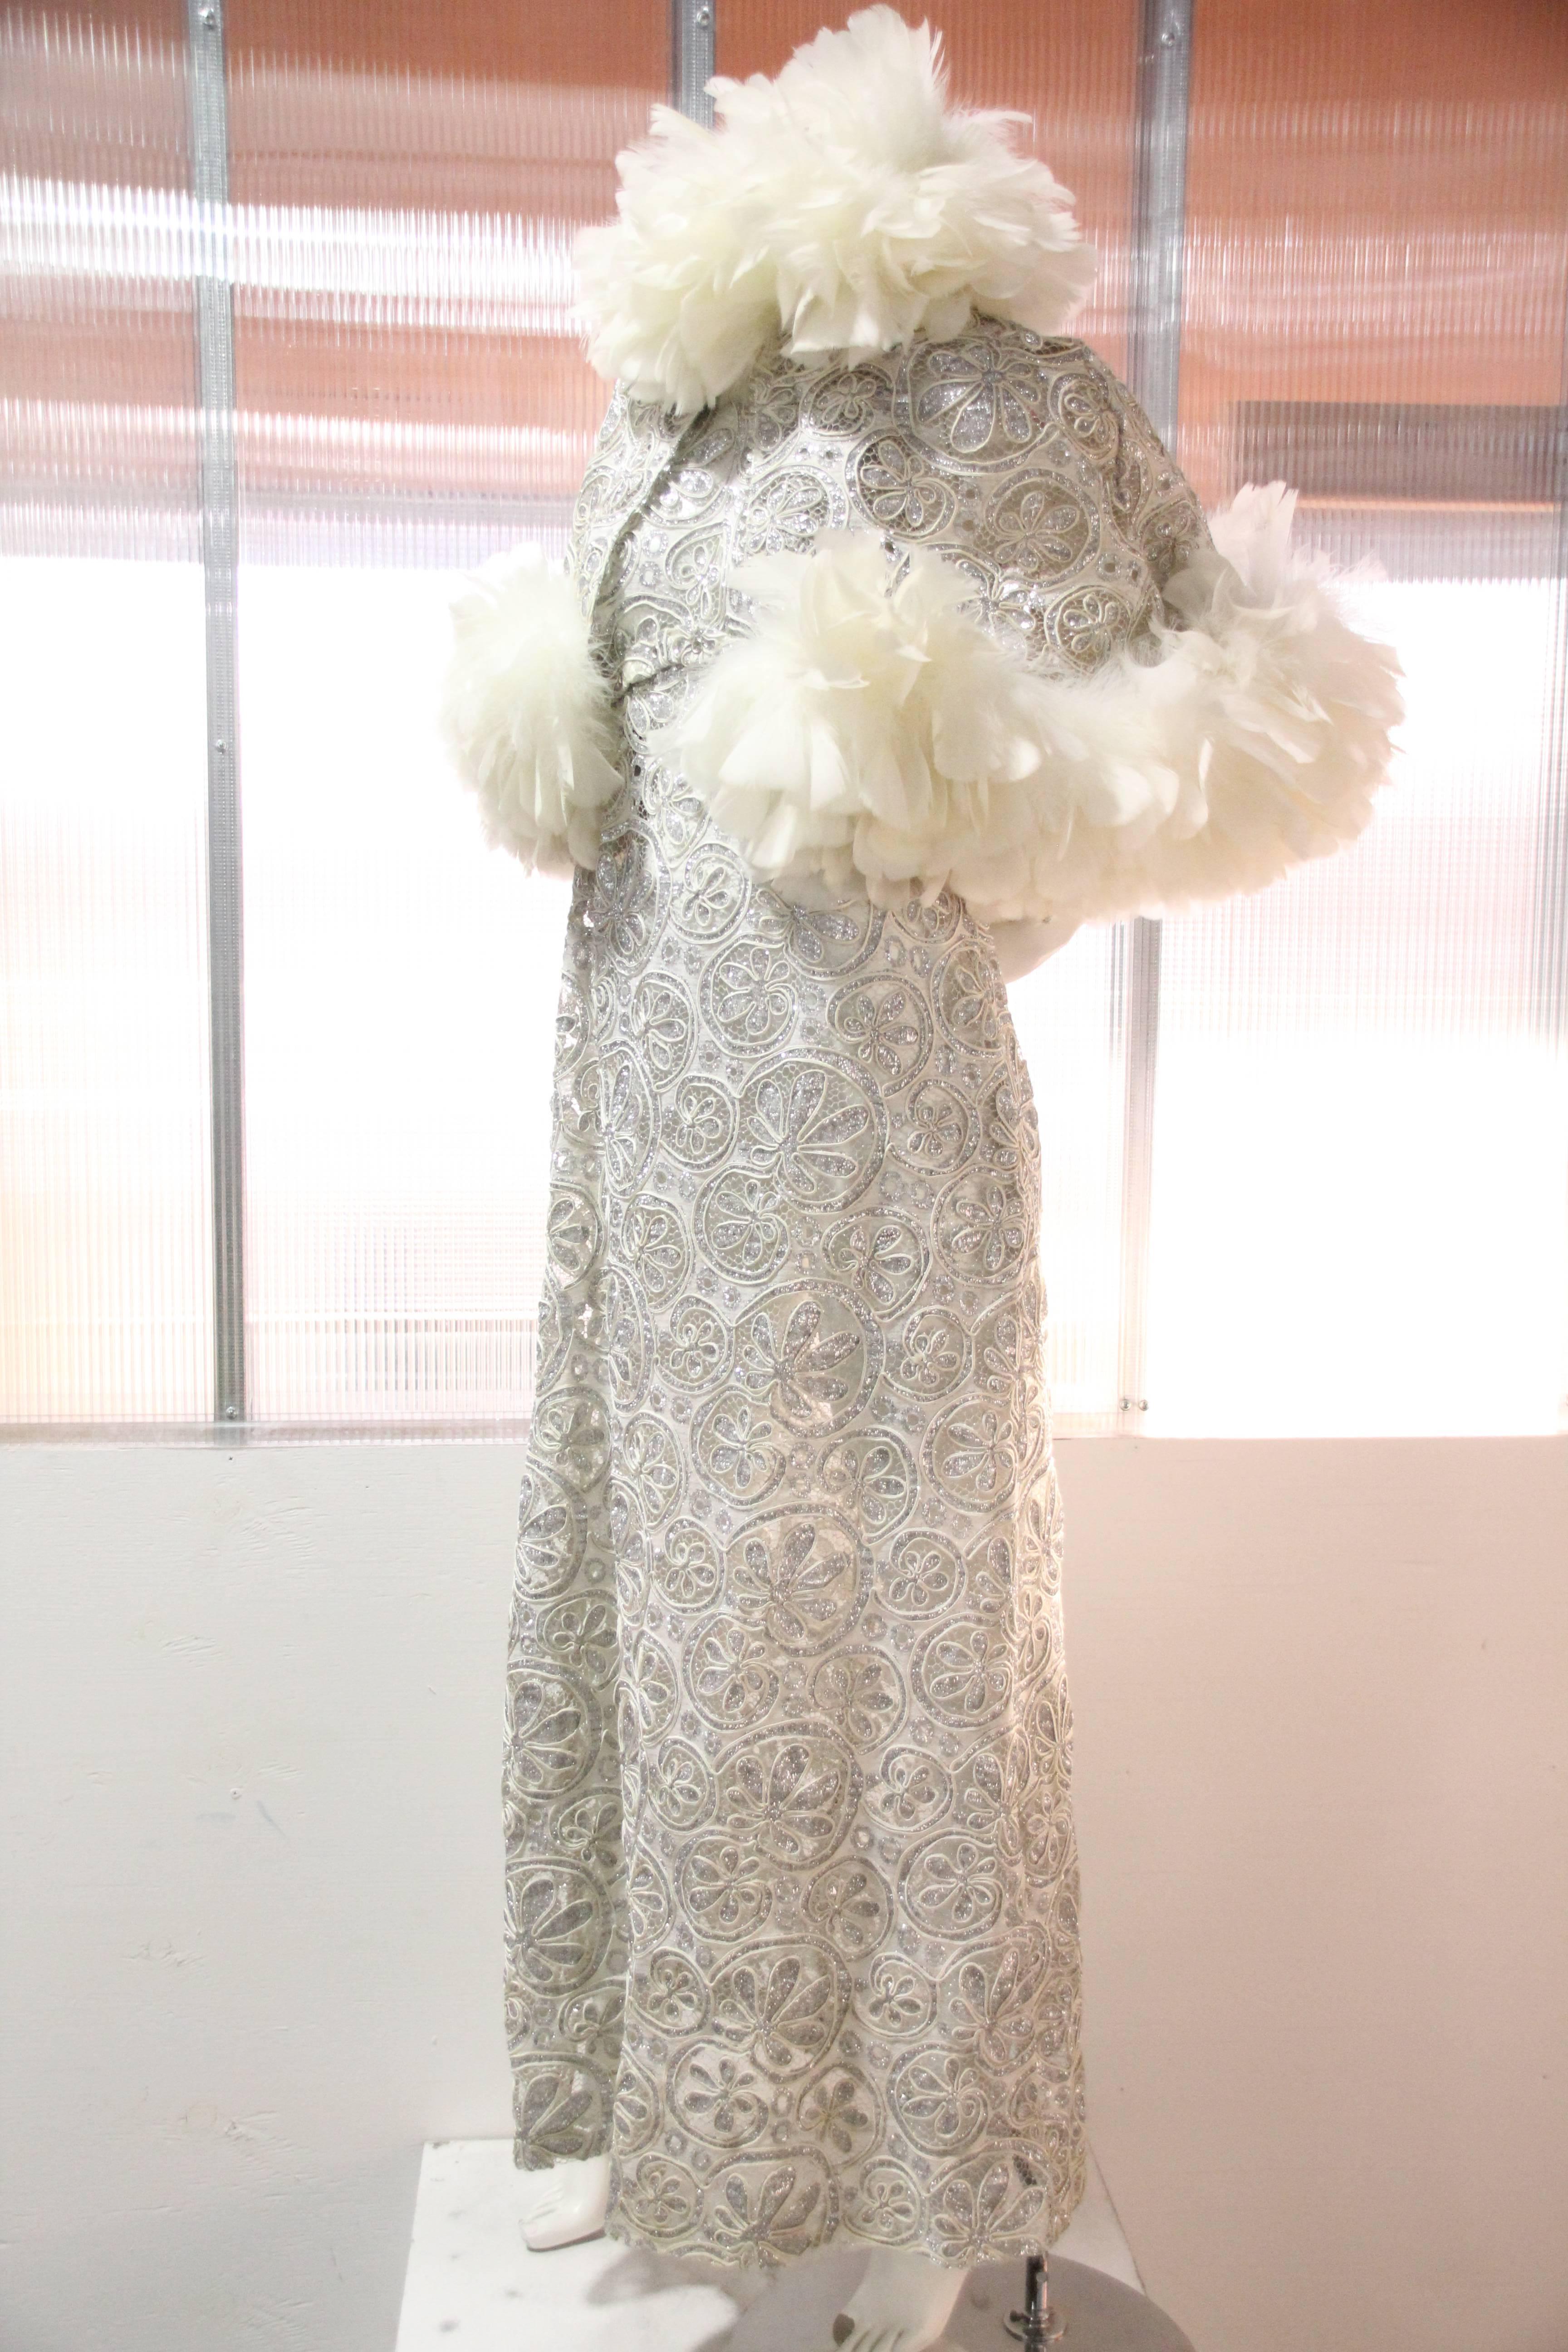 1960s Halter gown of a weighty couched and embroidered silver lame lace: Halter neckline. Collar is trimmed with feather boa and low-cut back is embellished with silver cut-out and eyelet punched leather. Dress is unlined. Caplet us trimmed in white